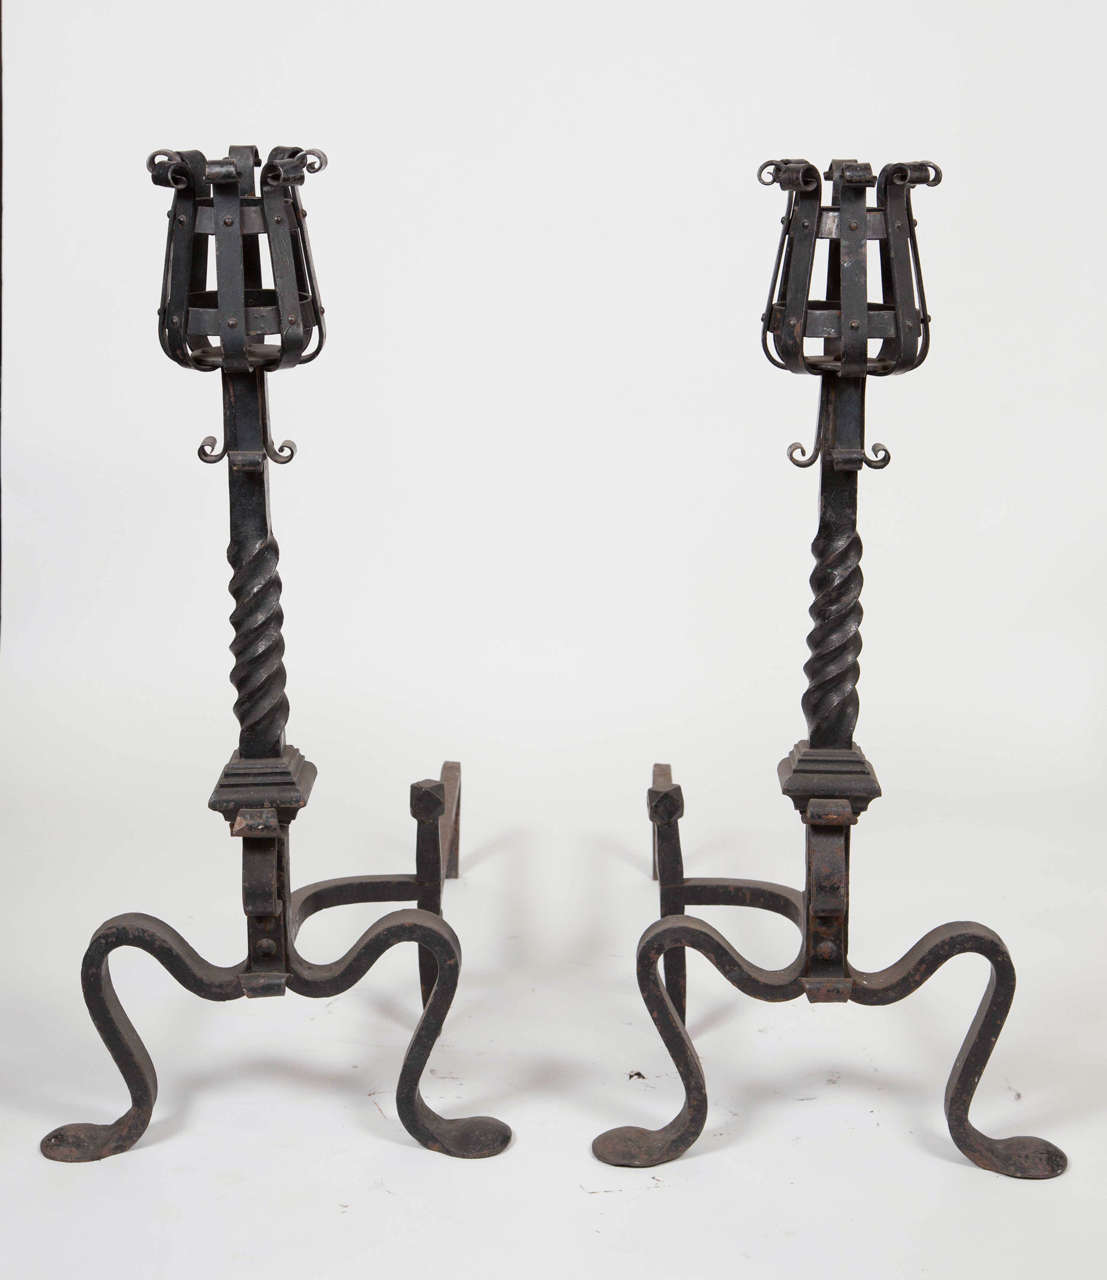 1890s pair of twisted and riveted wrought iron andirons with mug holder tops. These can be seen at our 1800 South Grand Ave location in Downtown Los Angeles.